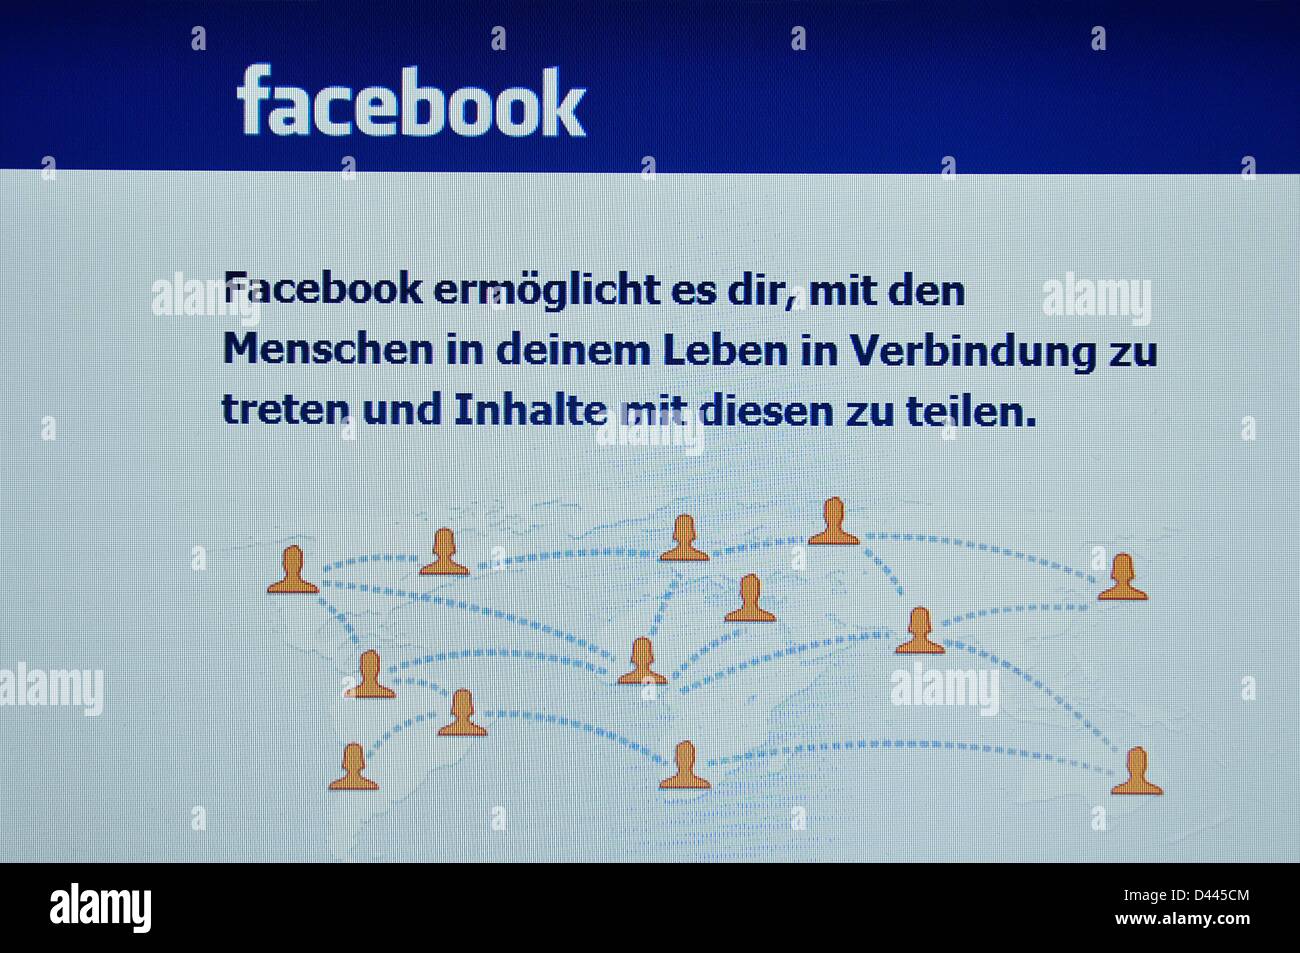 Illustration - View of the Internet page of the social networking service 'facebook' on 9 July 2011. In the text beneath it, the German translation of the company's motto is presented: 'Facebook helps you connect and share with the people in your life.' Fotoarchiv für ZeitgeschichteS.Steinach Stock Photo